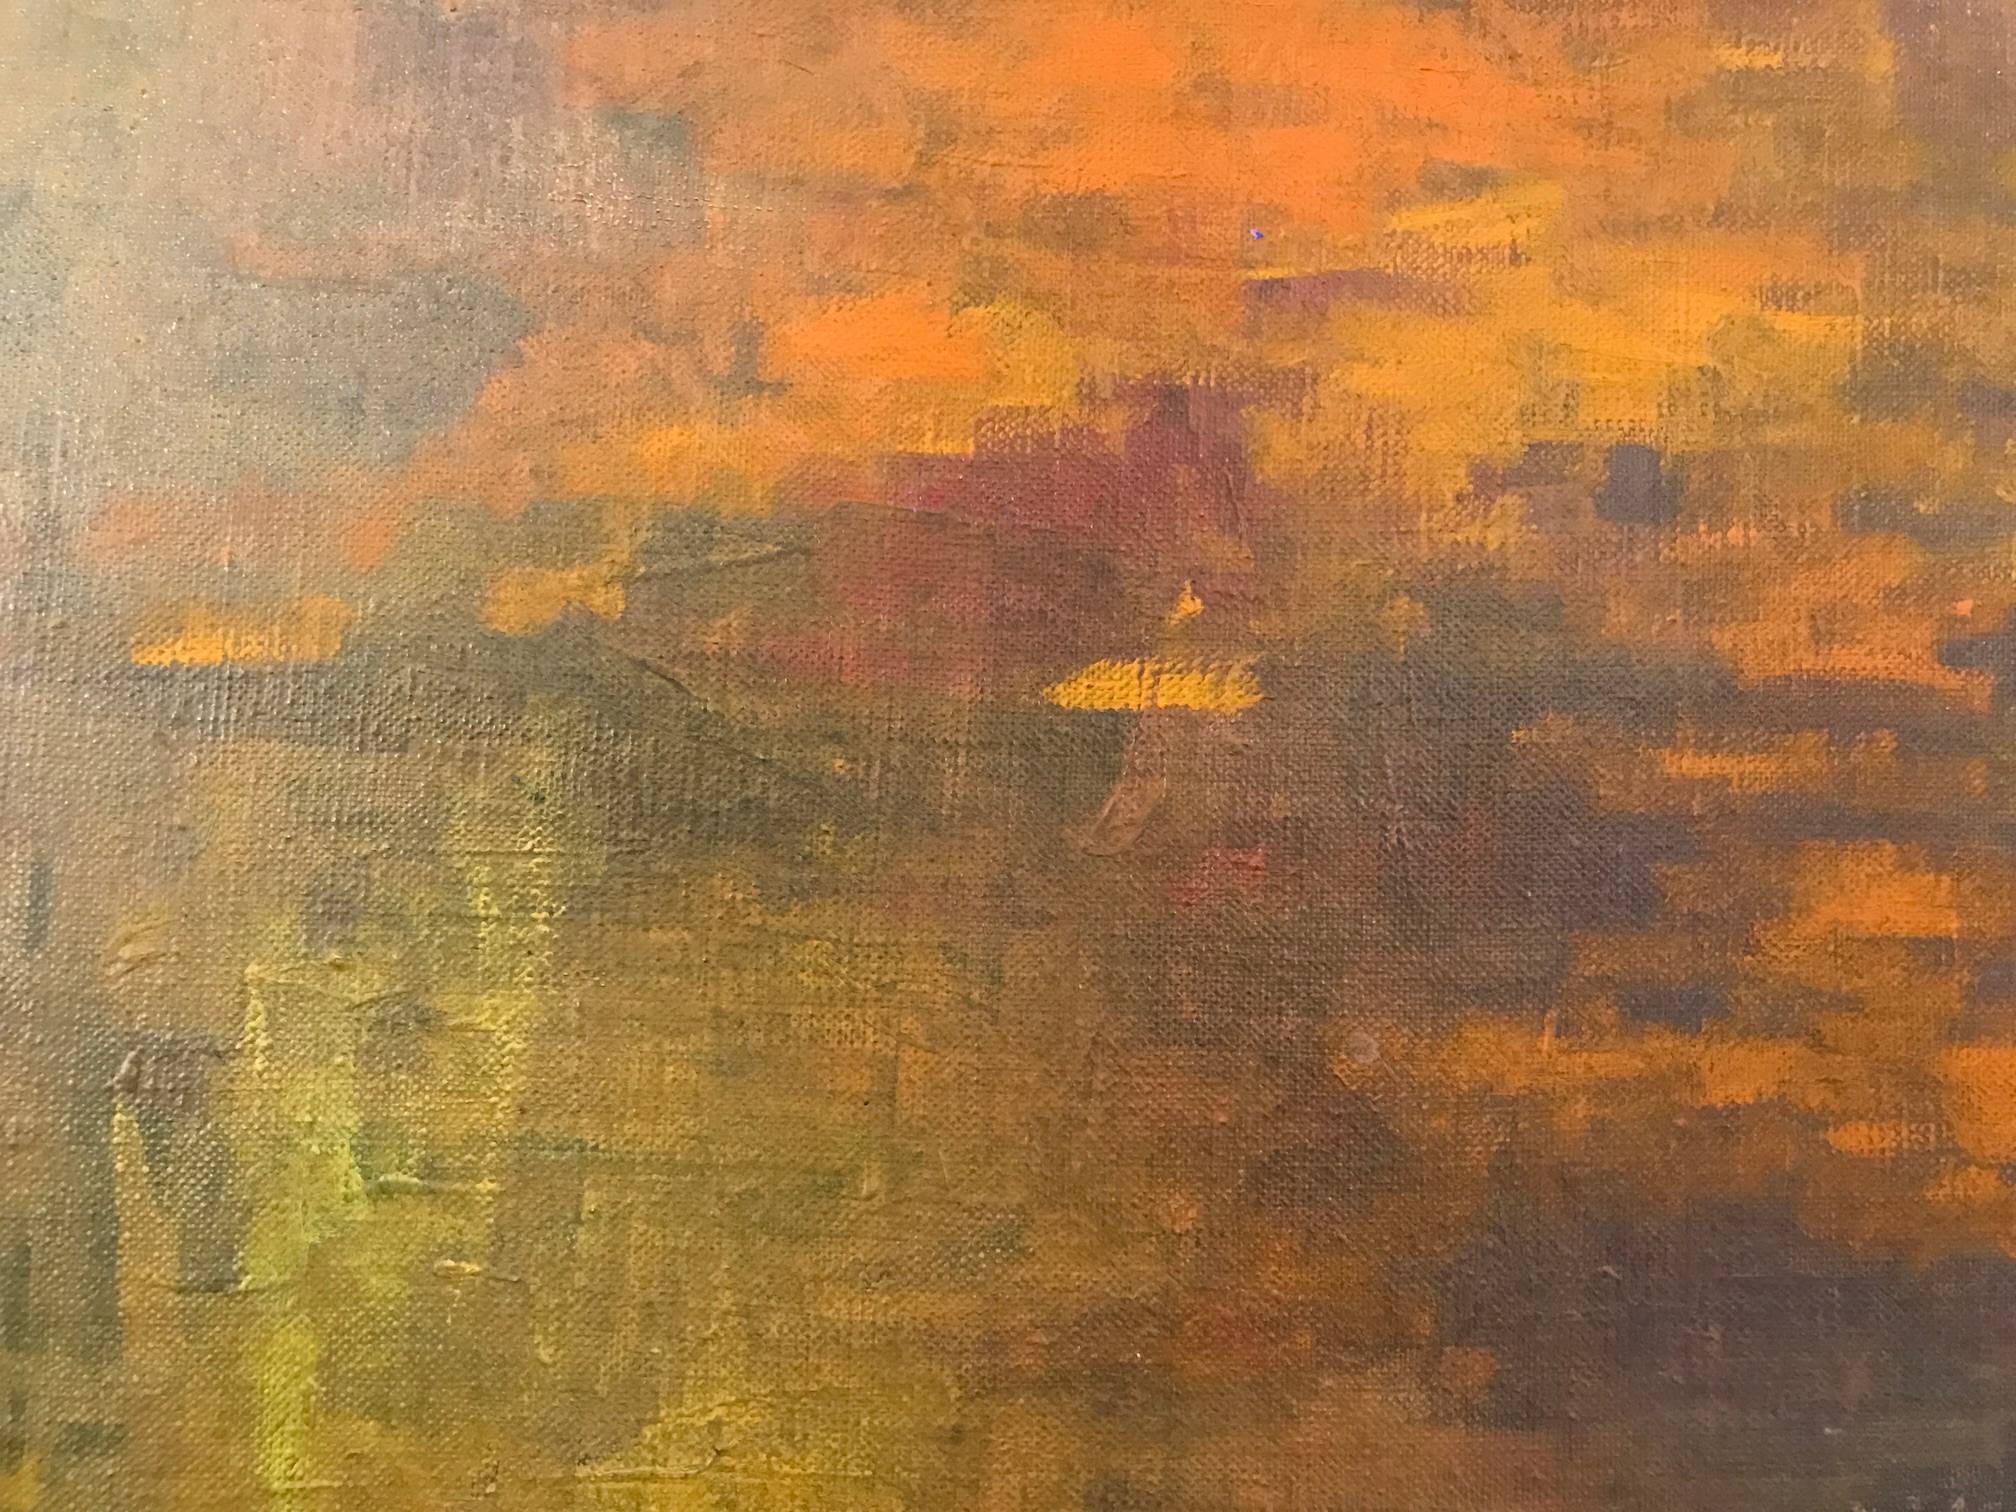 Texas Sunrise Abstract Impressionist Painting (Braun), Abstract Painting, von William Anzalone